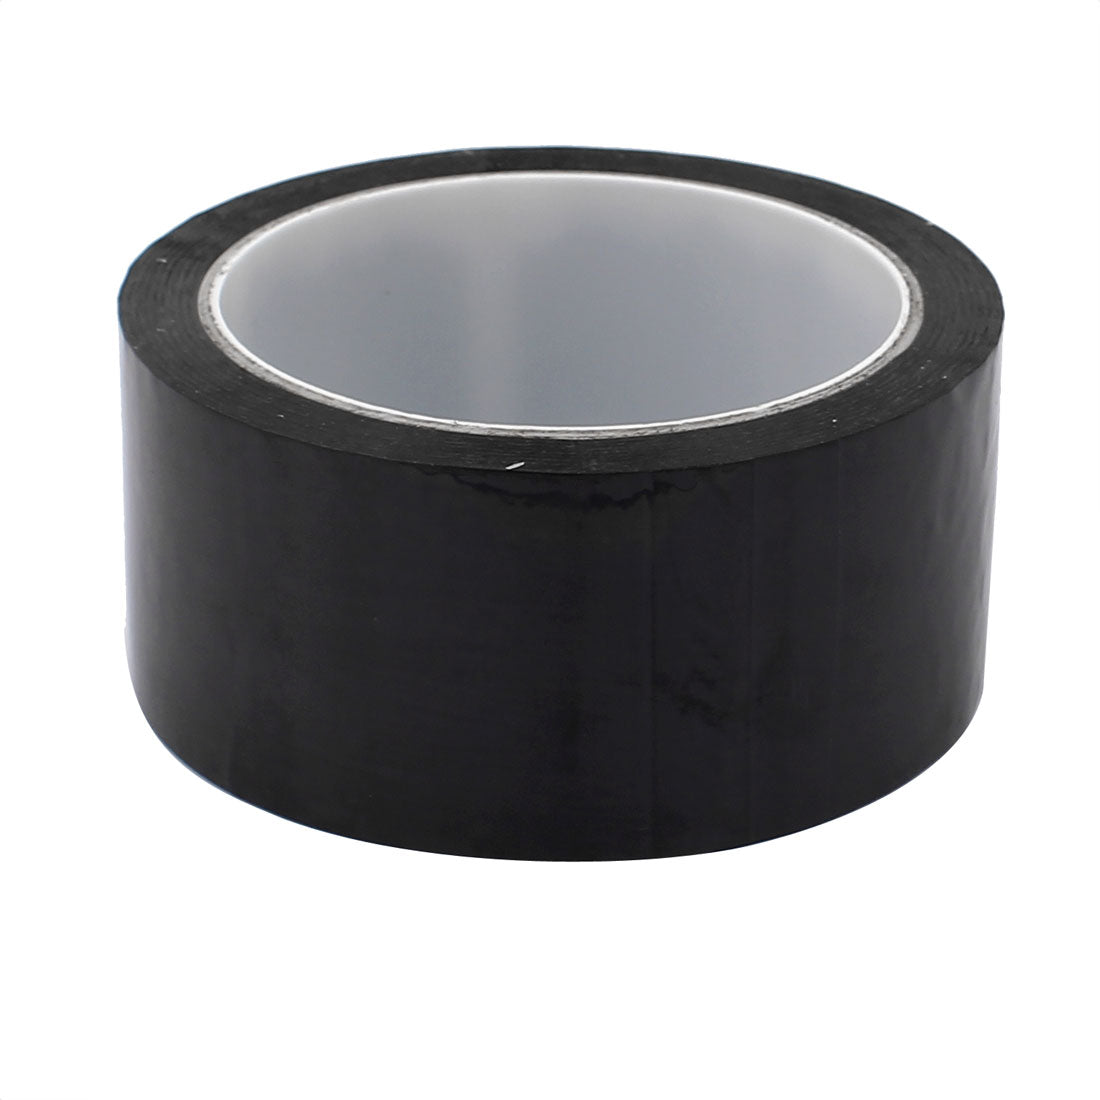 uxcell Uxcell 50mm Single Sided Strong Self Adhesive Mylar Tape 50M Black